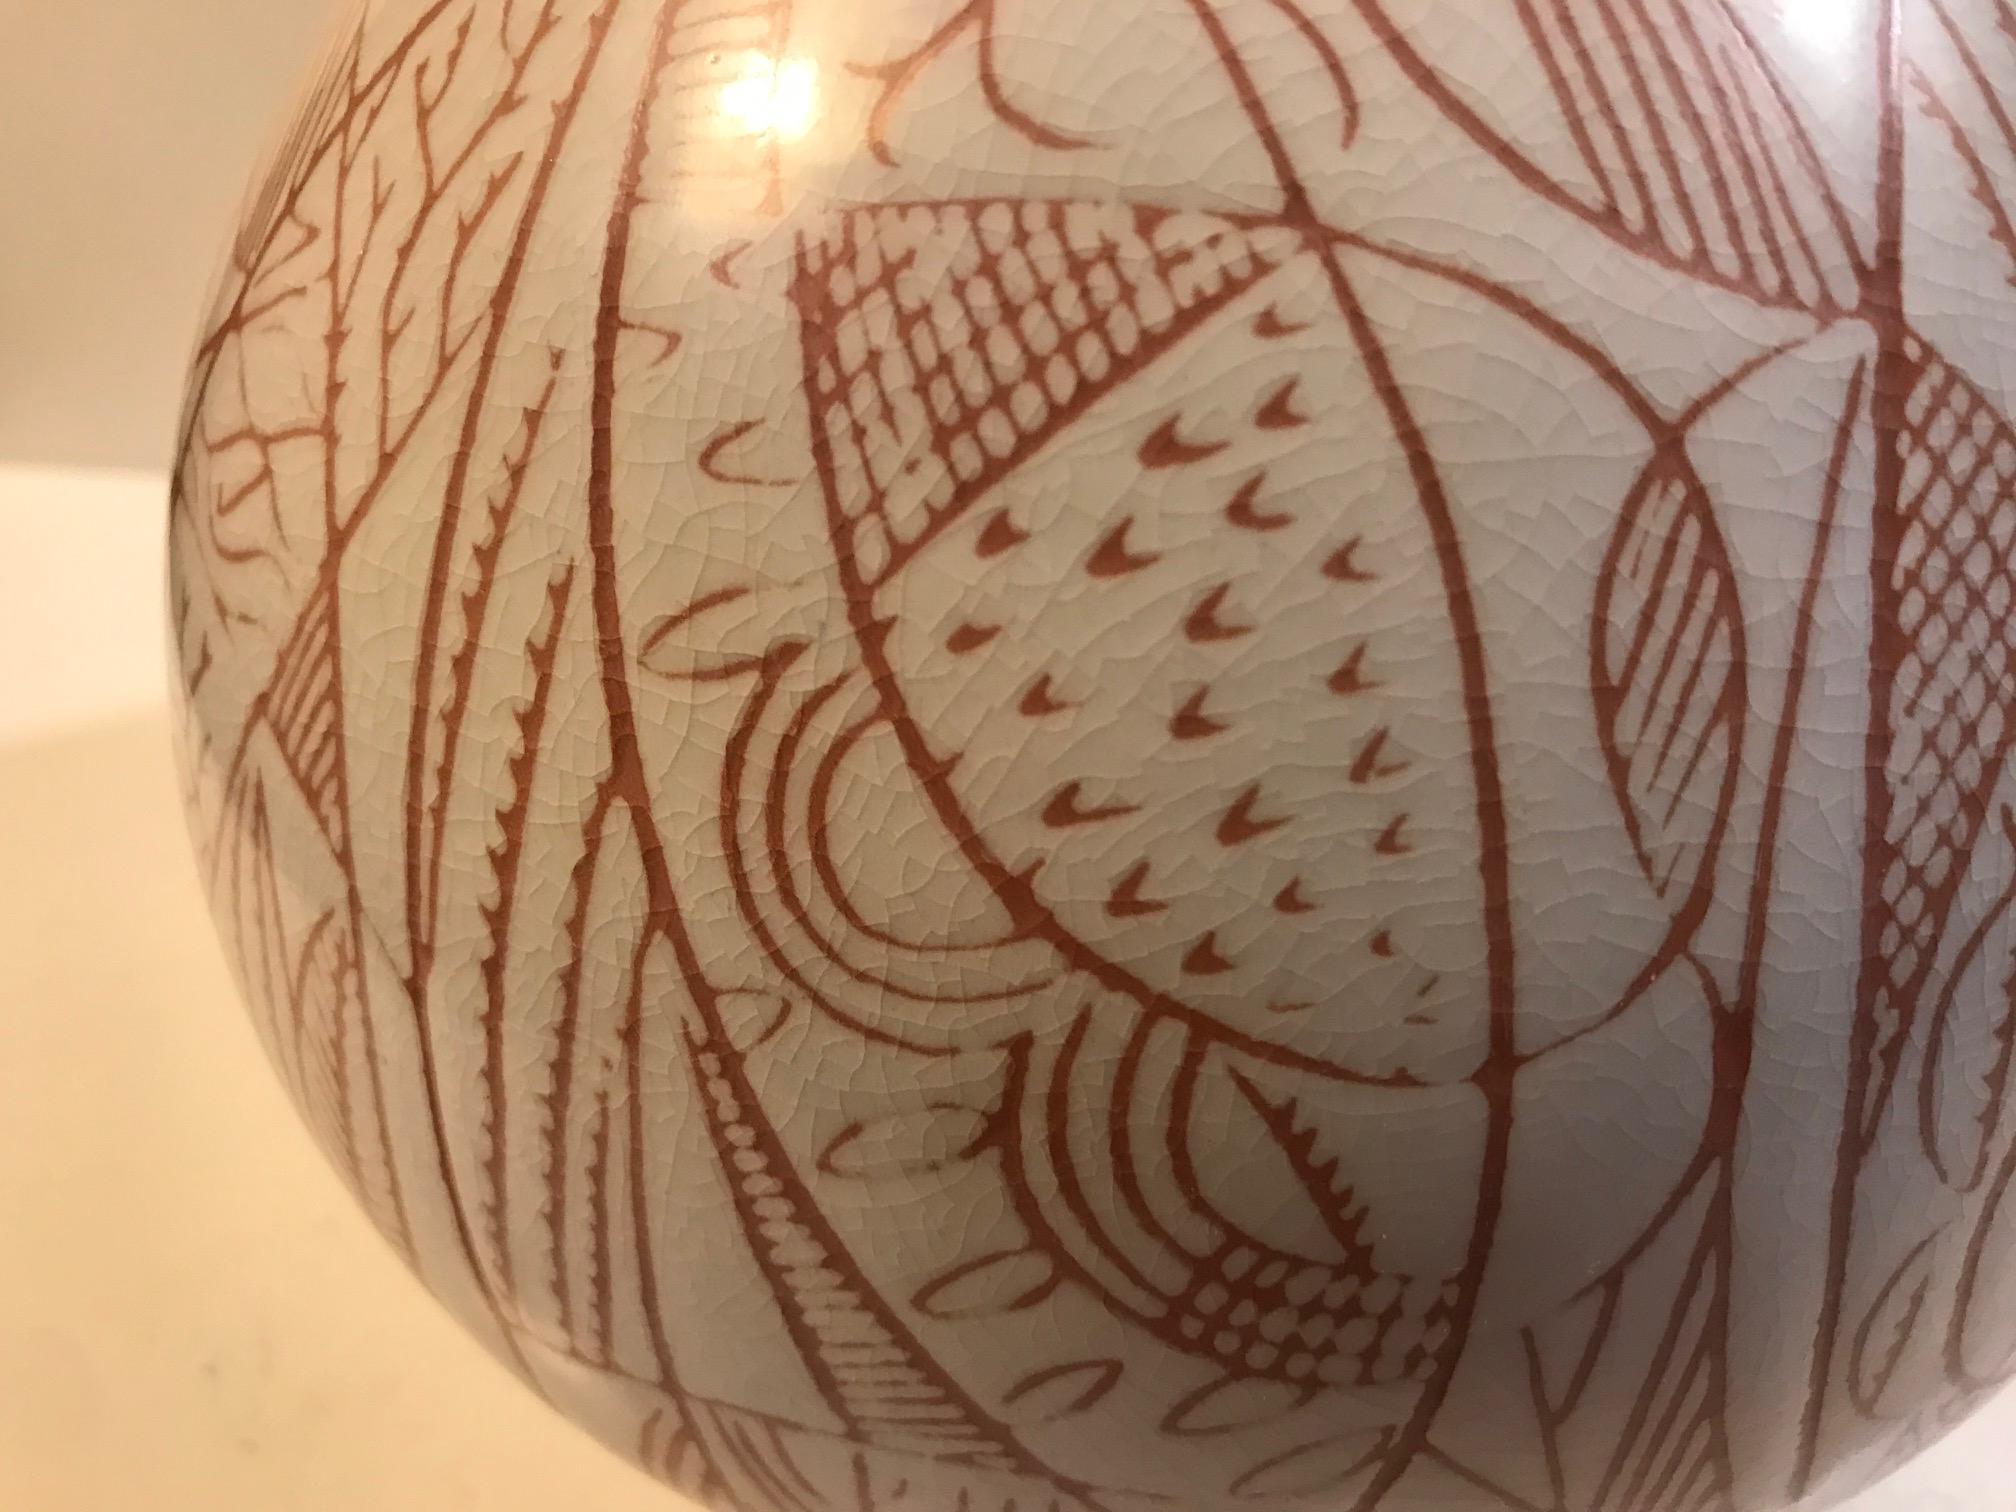 Extremely rare faience vase designed by Nils Thorsson. Closely related to his Løvspring series but still very different. It features a pure ovoid shape, abstract nature inspired decor and intended crazing to the white glaze. Its a rather large piece